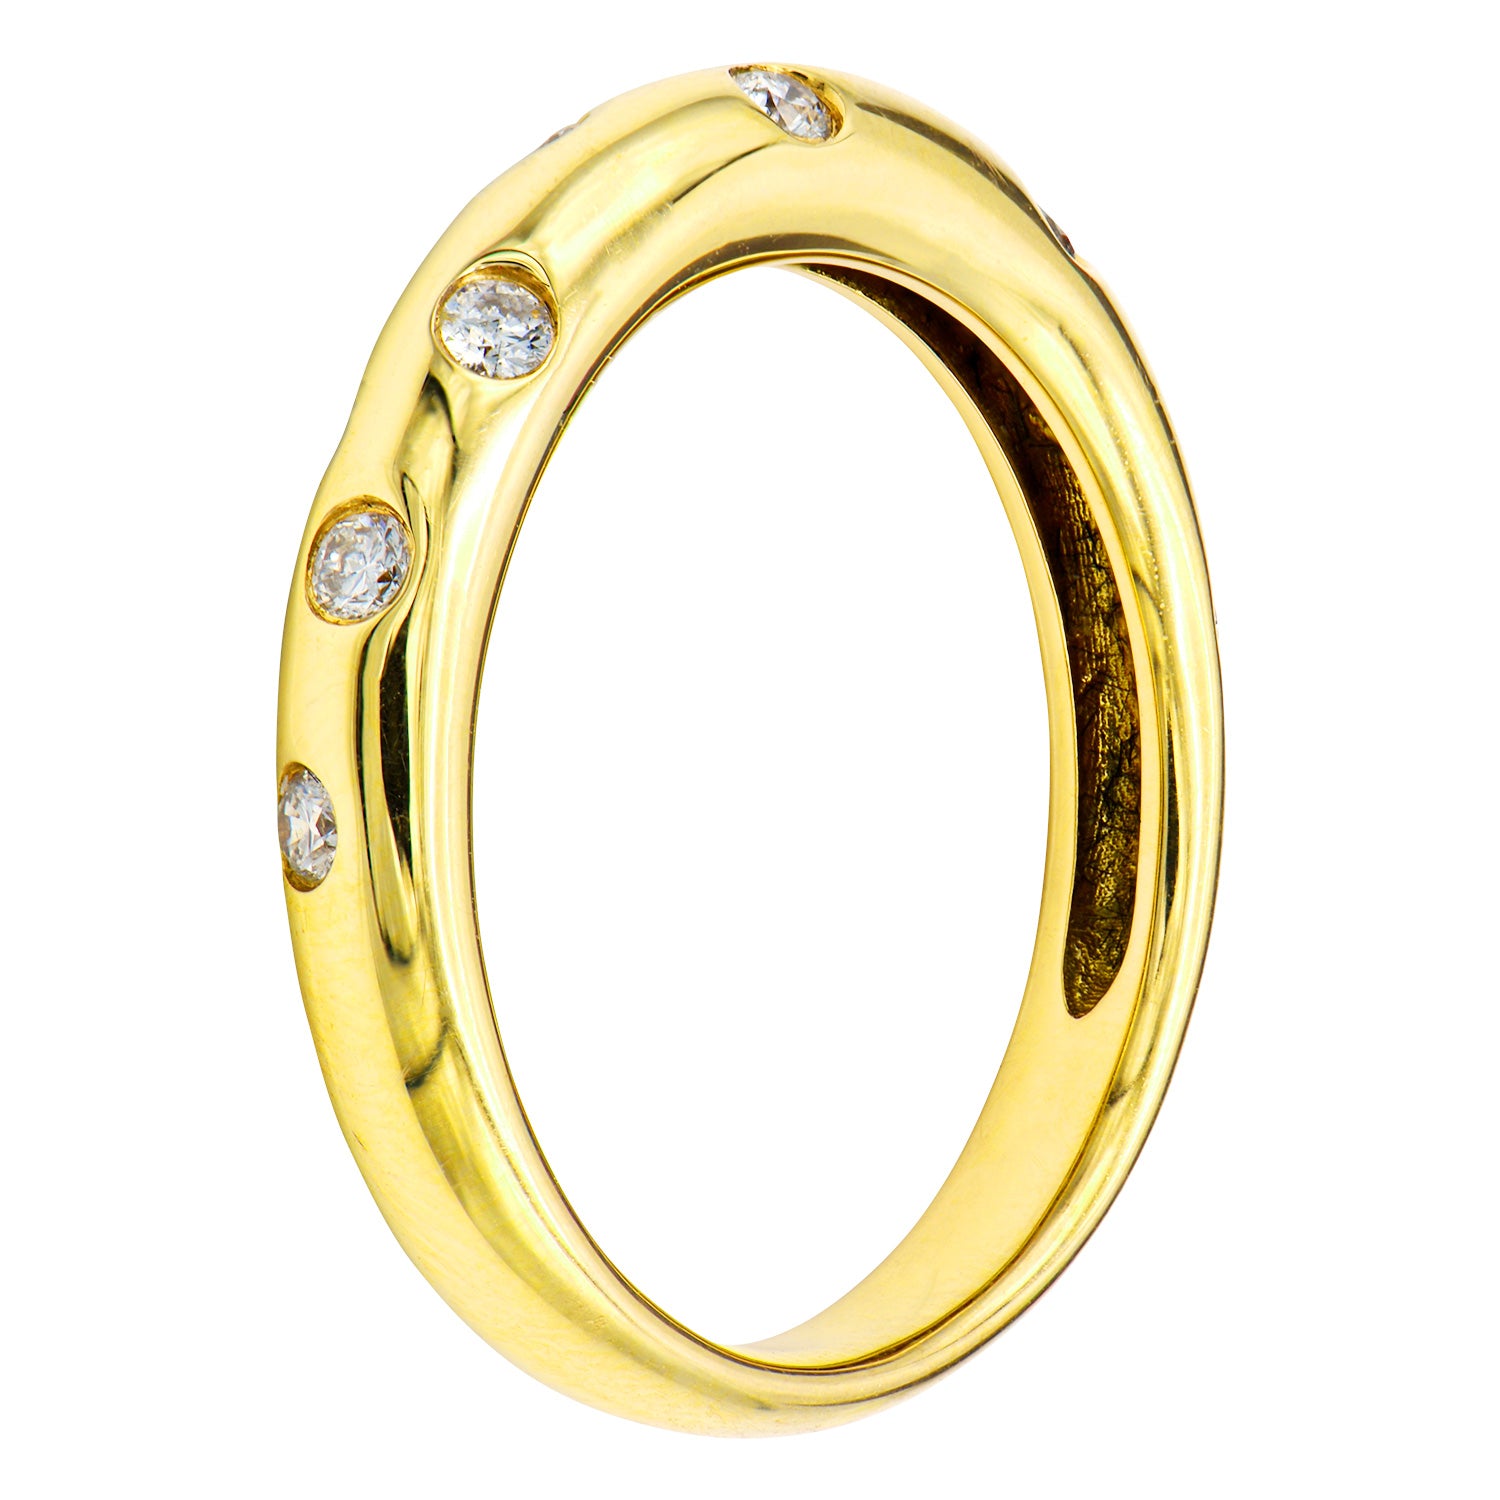 Ring 14KW/2.5G 10RD-0.32CT Size 6